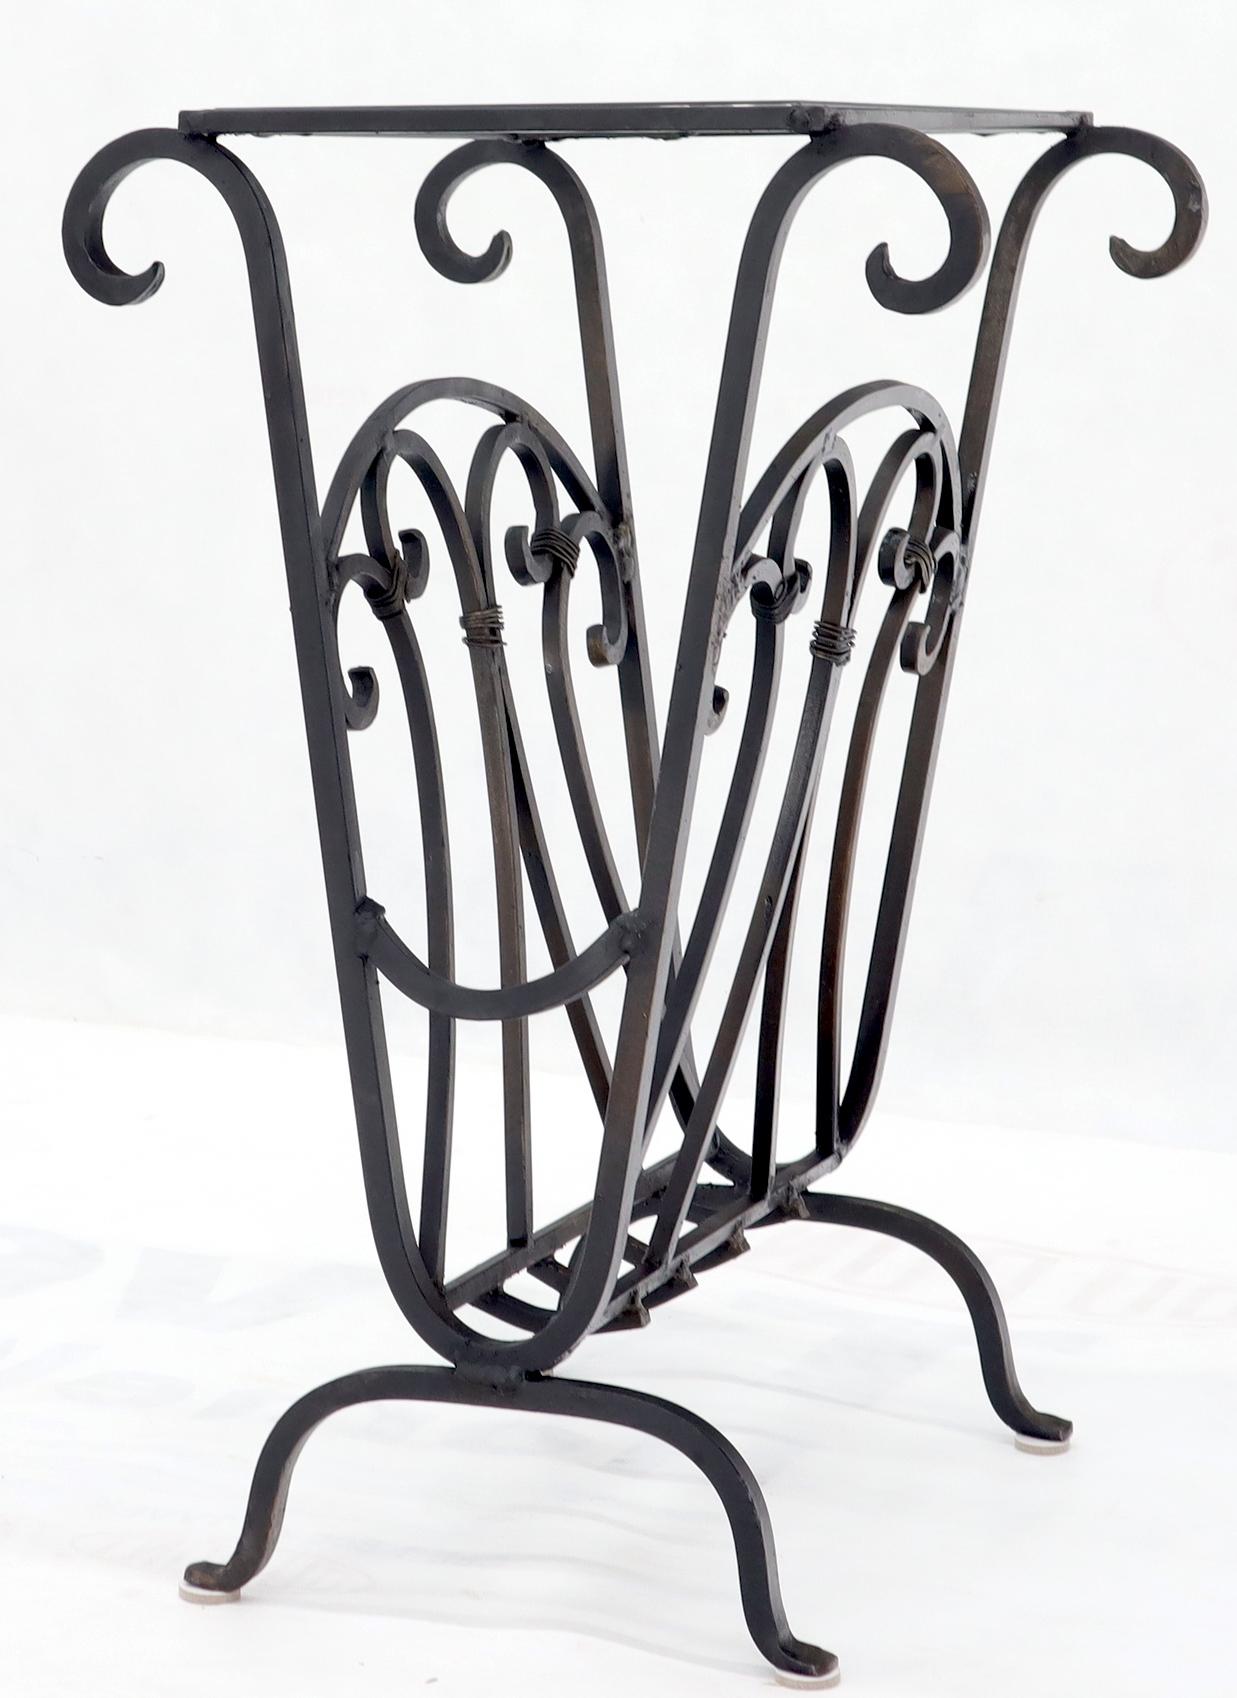 American Large Wrought Iron Magazine Stand End Table with Glass Top